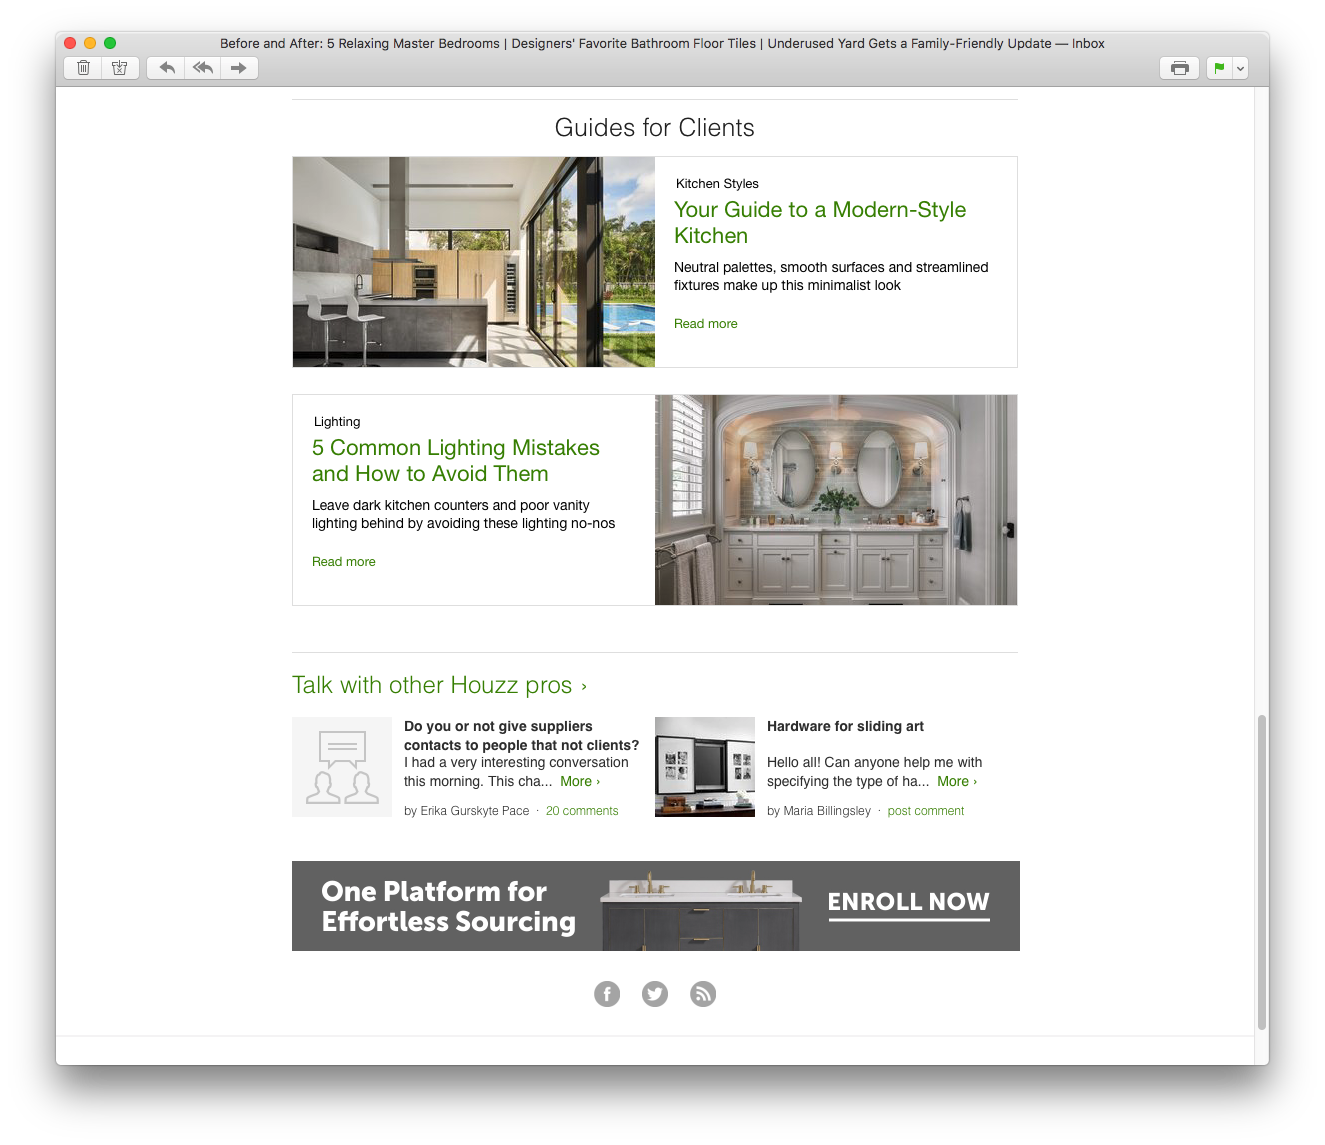 A screenshot of a webpage from Houzz featuring the articles "Your Guide to a Modern-Style Kitchen" and "5 Common Lighting Mistakes and How to Avoid Them."